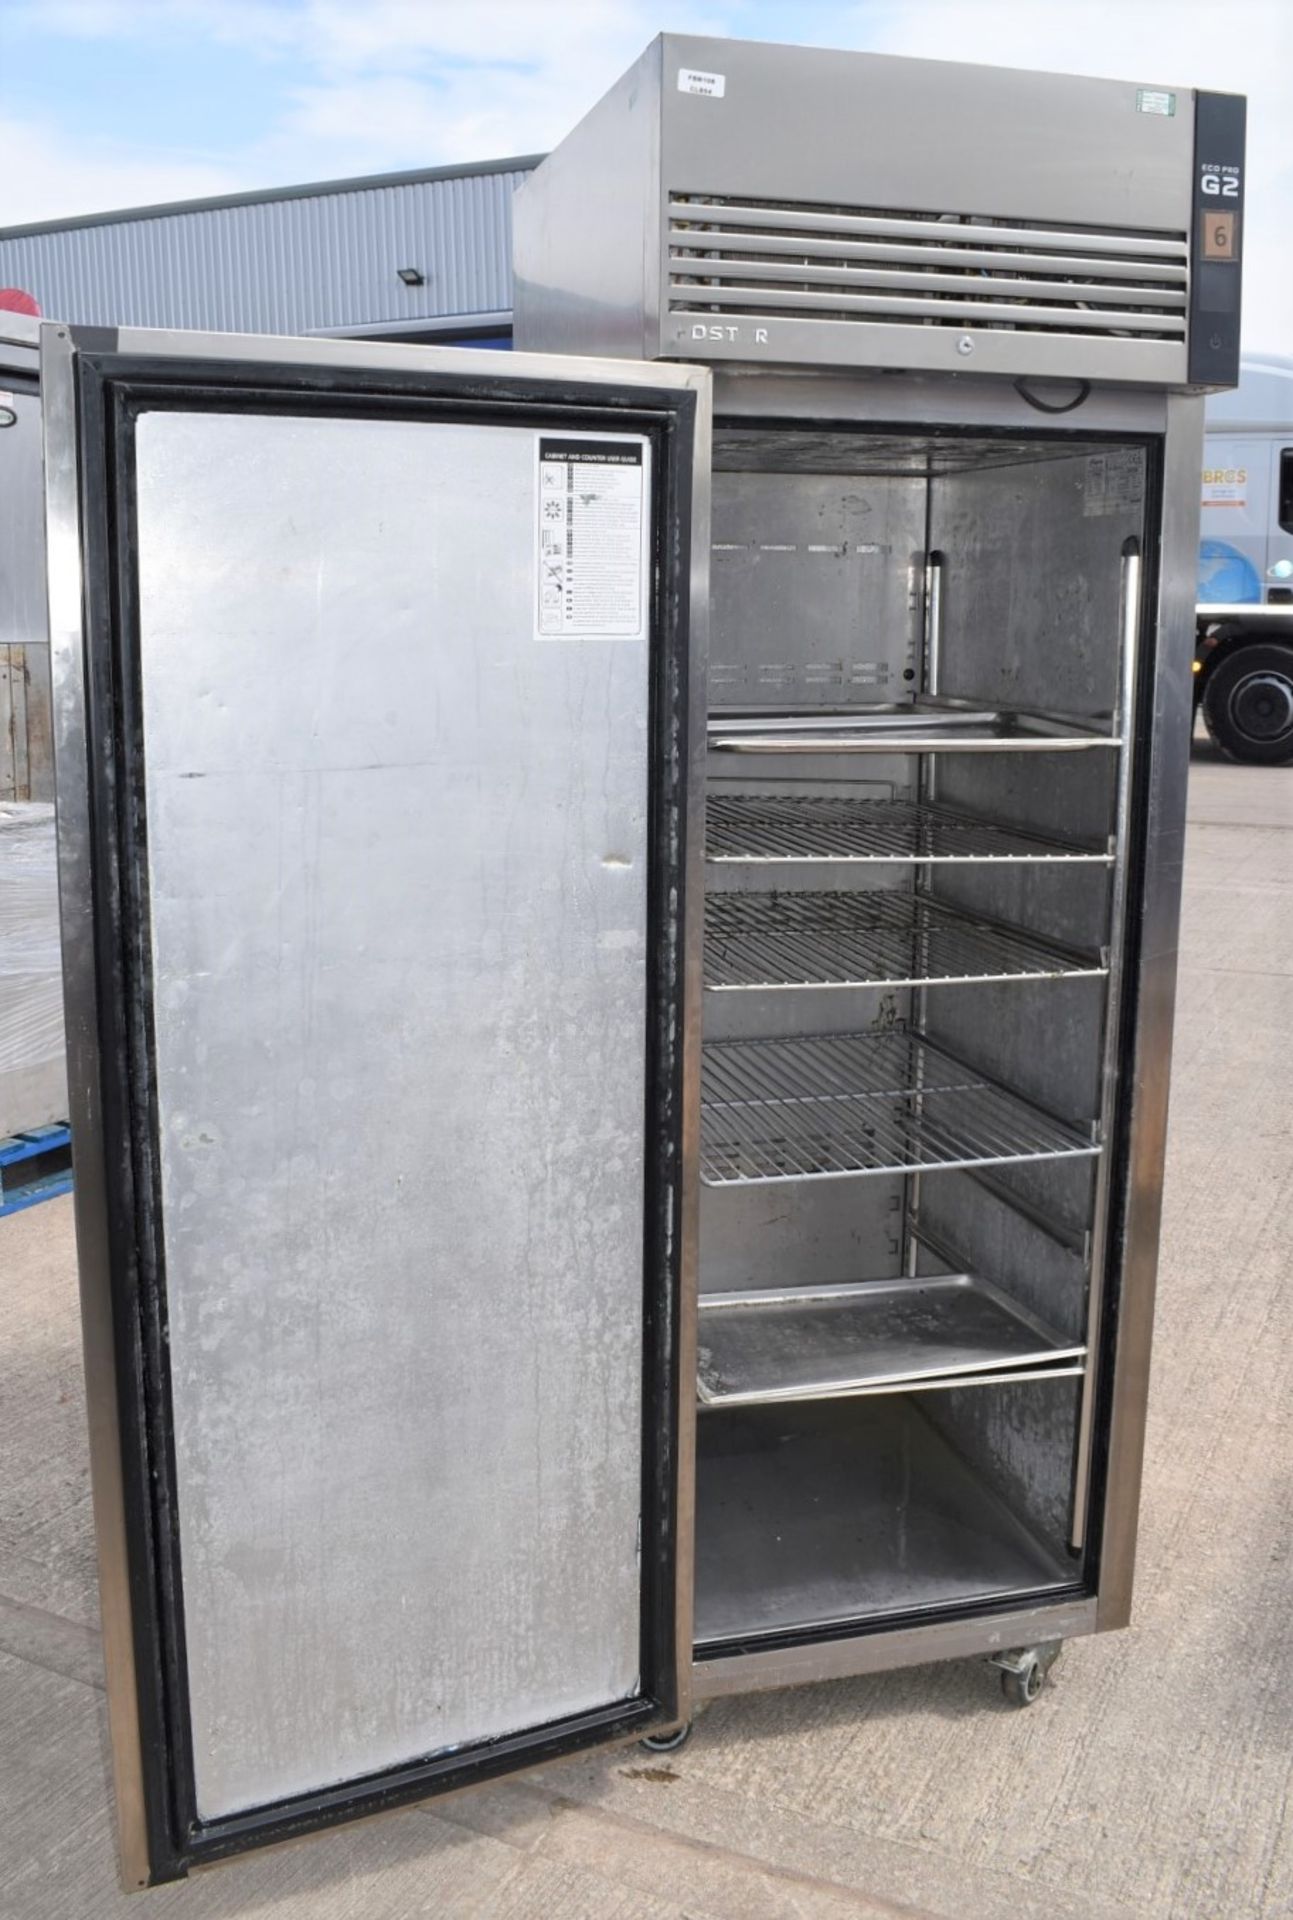 1 x Foster EcoPro G2 EP700M Upright Refrigerated Meat Cabinet - Stainless Steel Exterior RRP £3,059 - Image 3 of 6